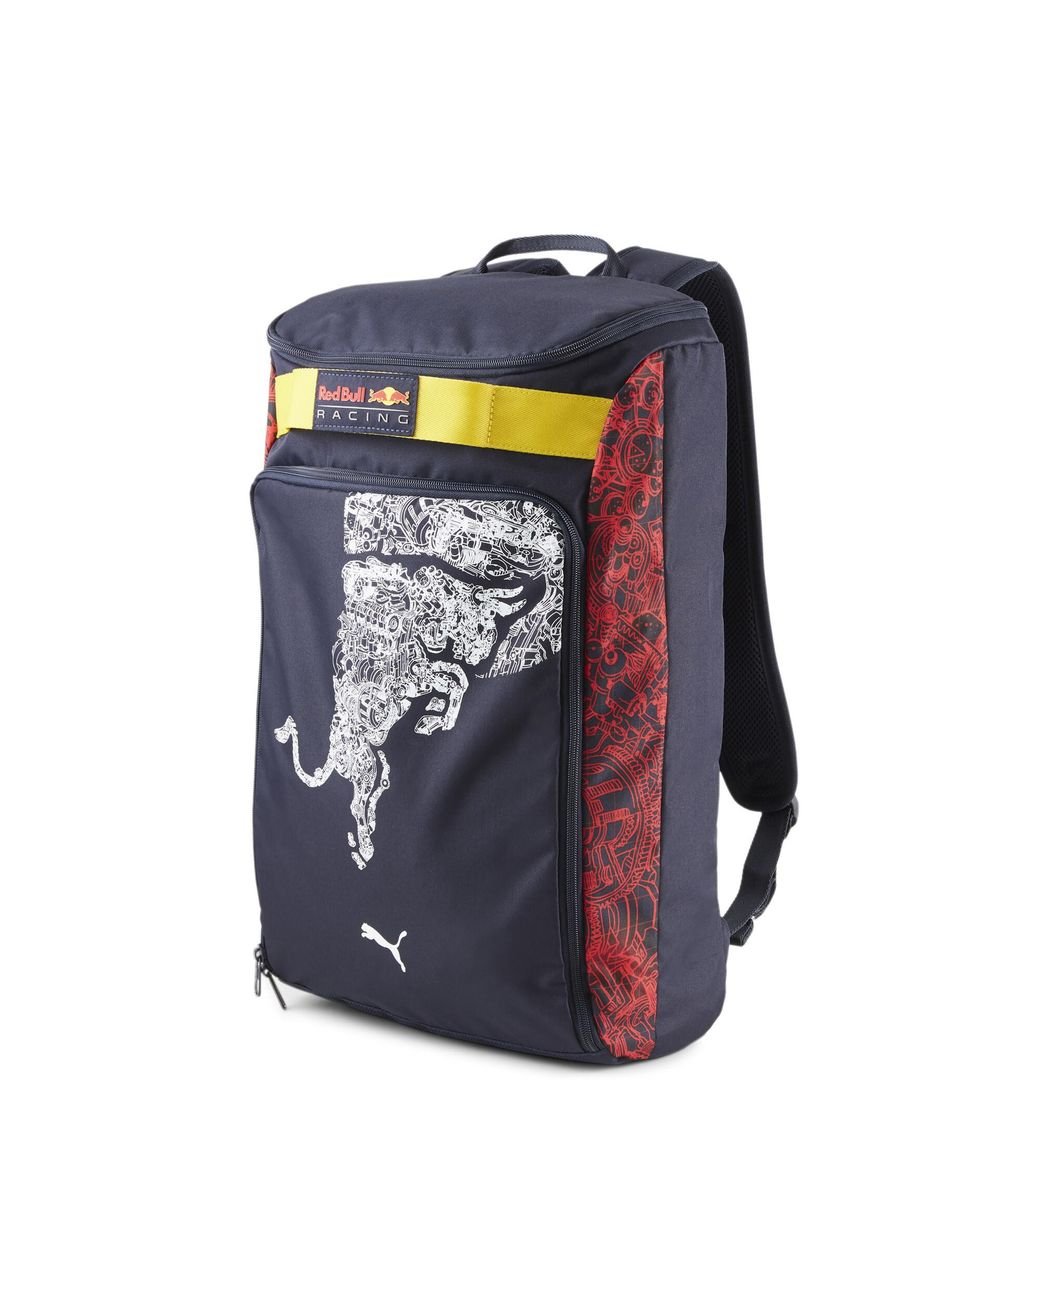 red bull signature series backpack - Google Search | Gear bag, Bags, Red  bull